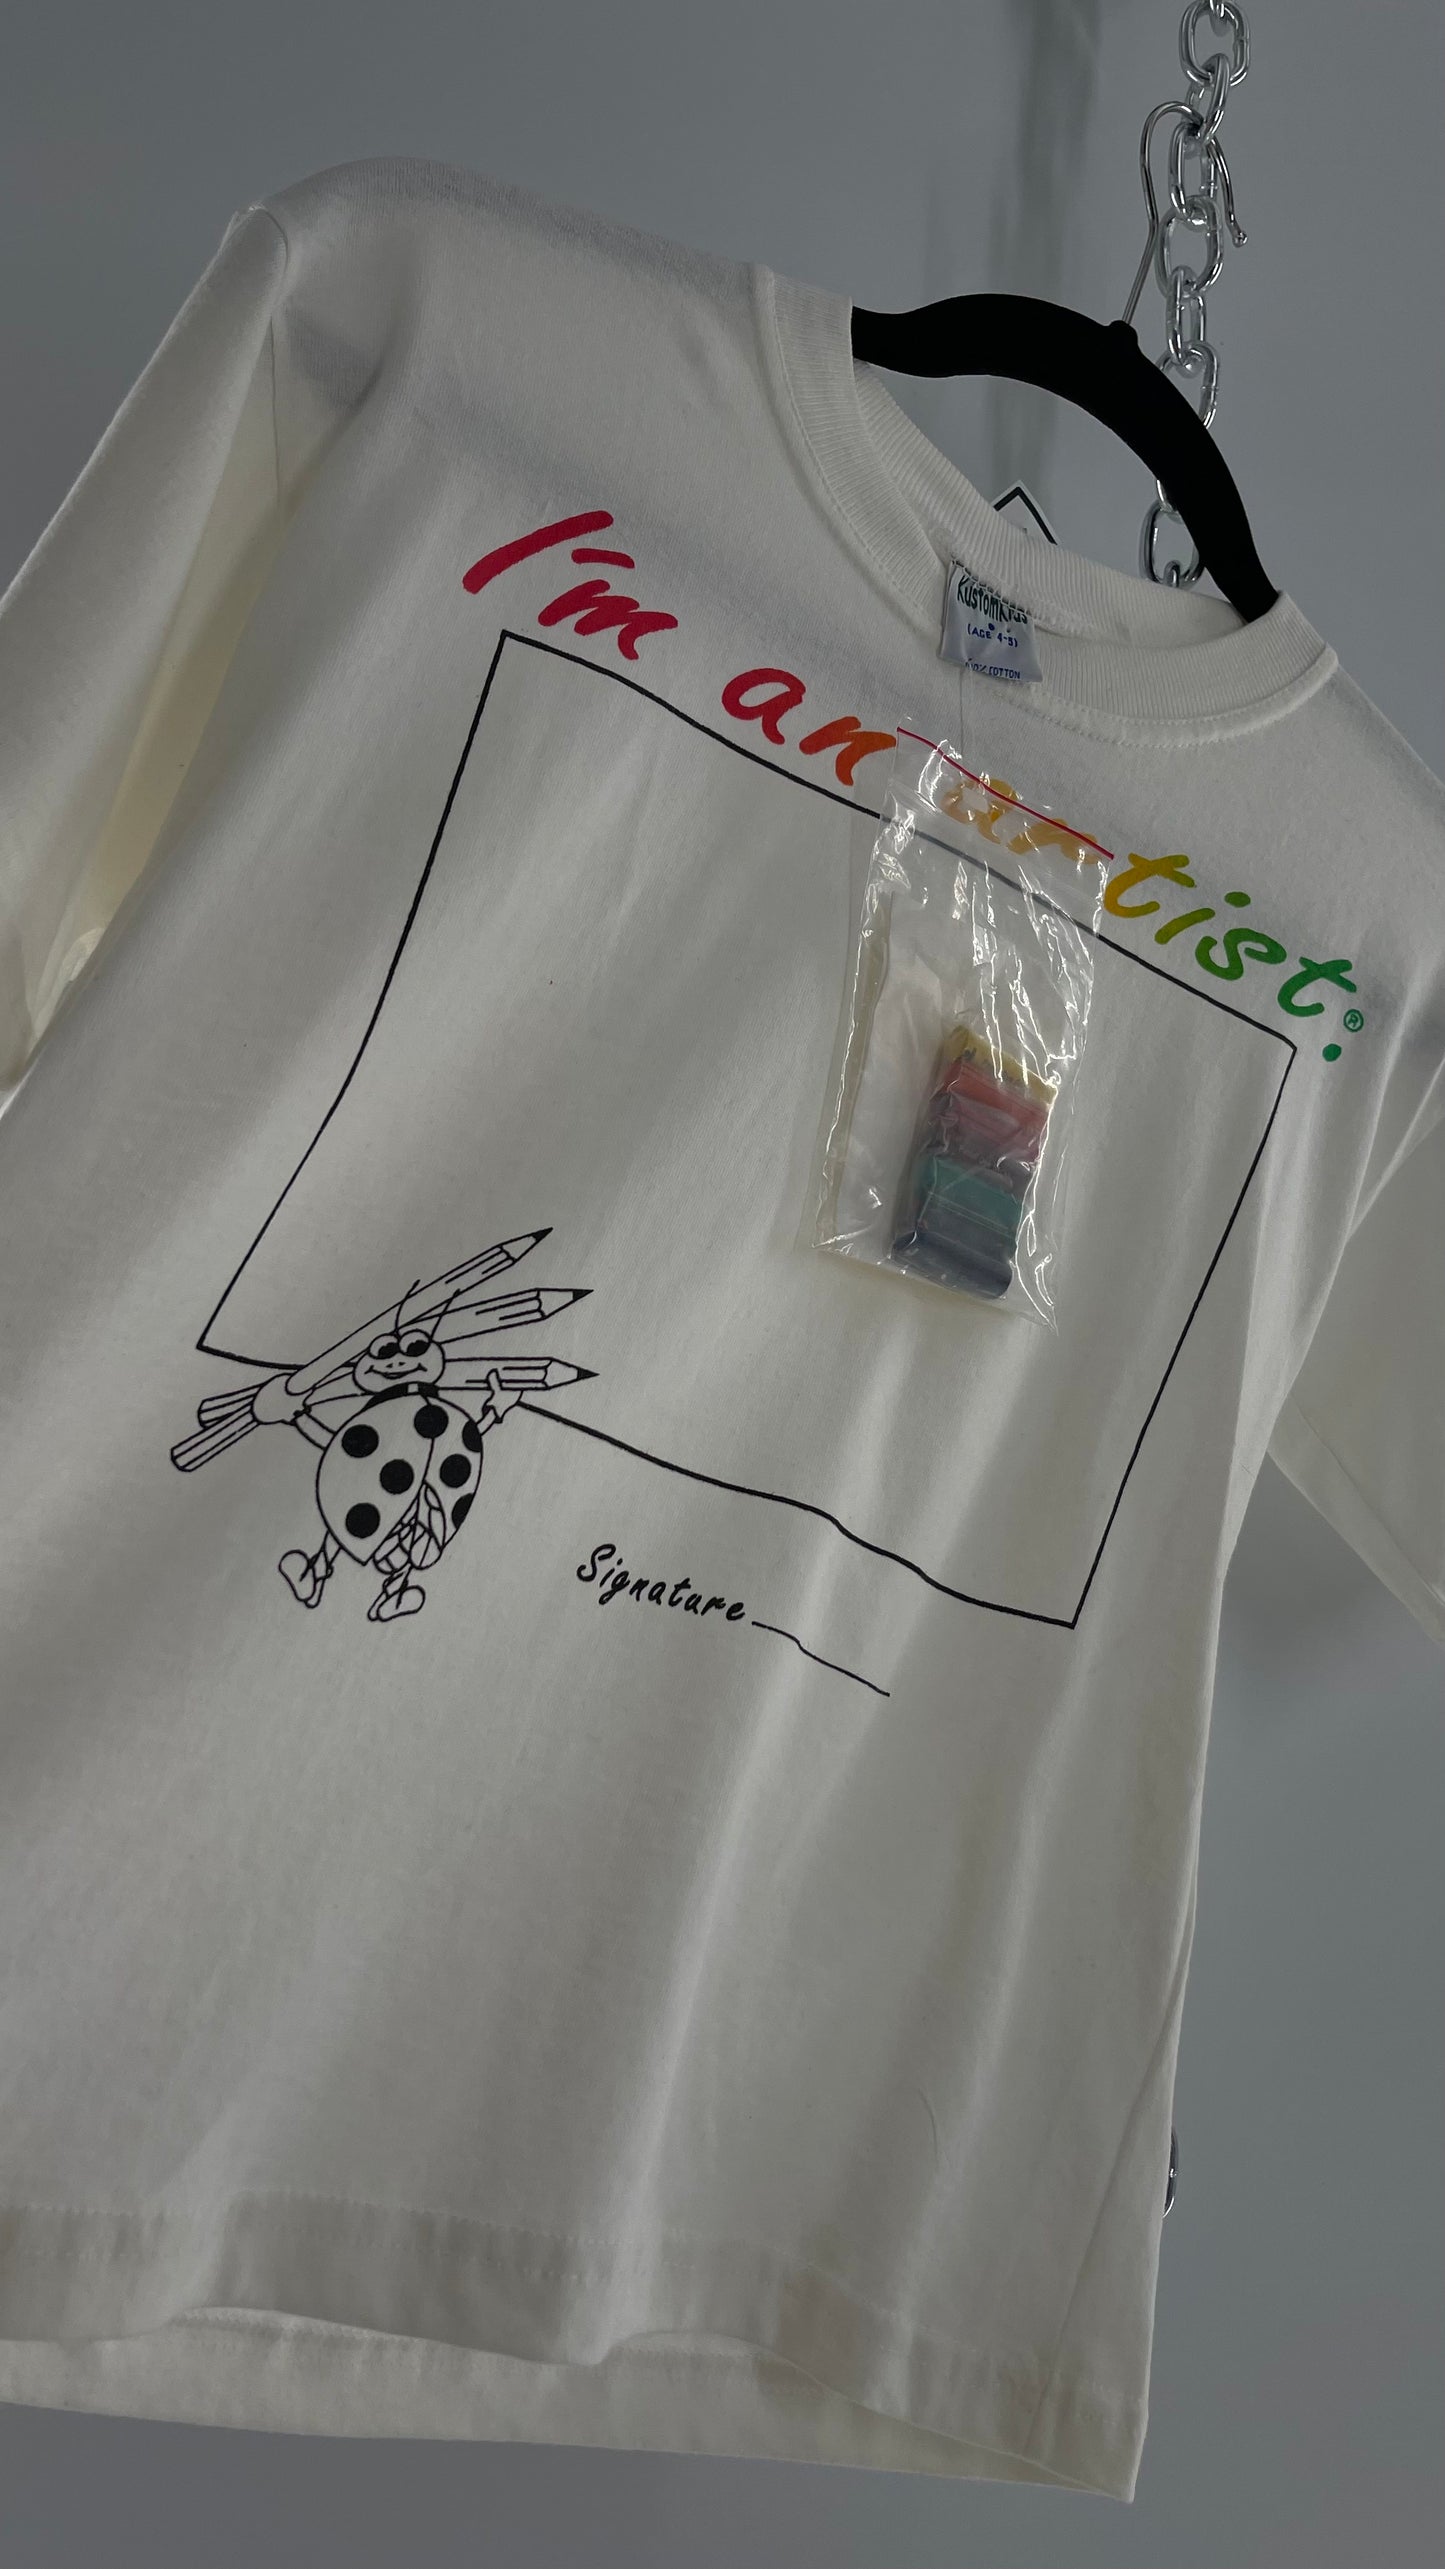 Deadstock Vintage 1990s “I’m an Artist” Baby T with Oil Based Crayons to Draw with (XS/S)